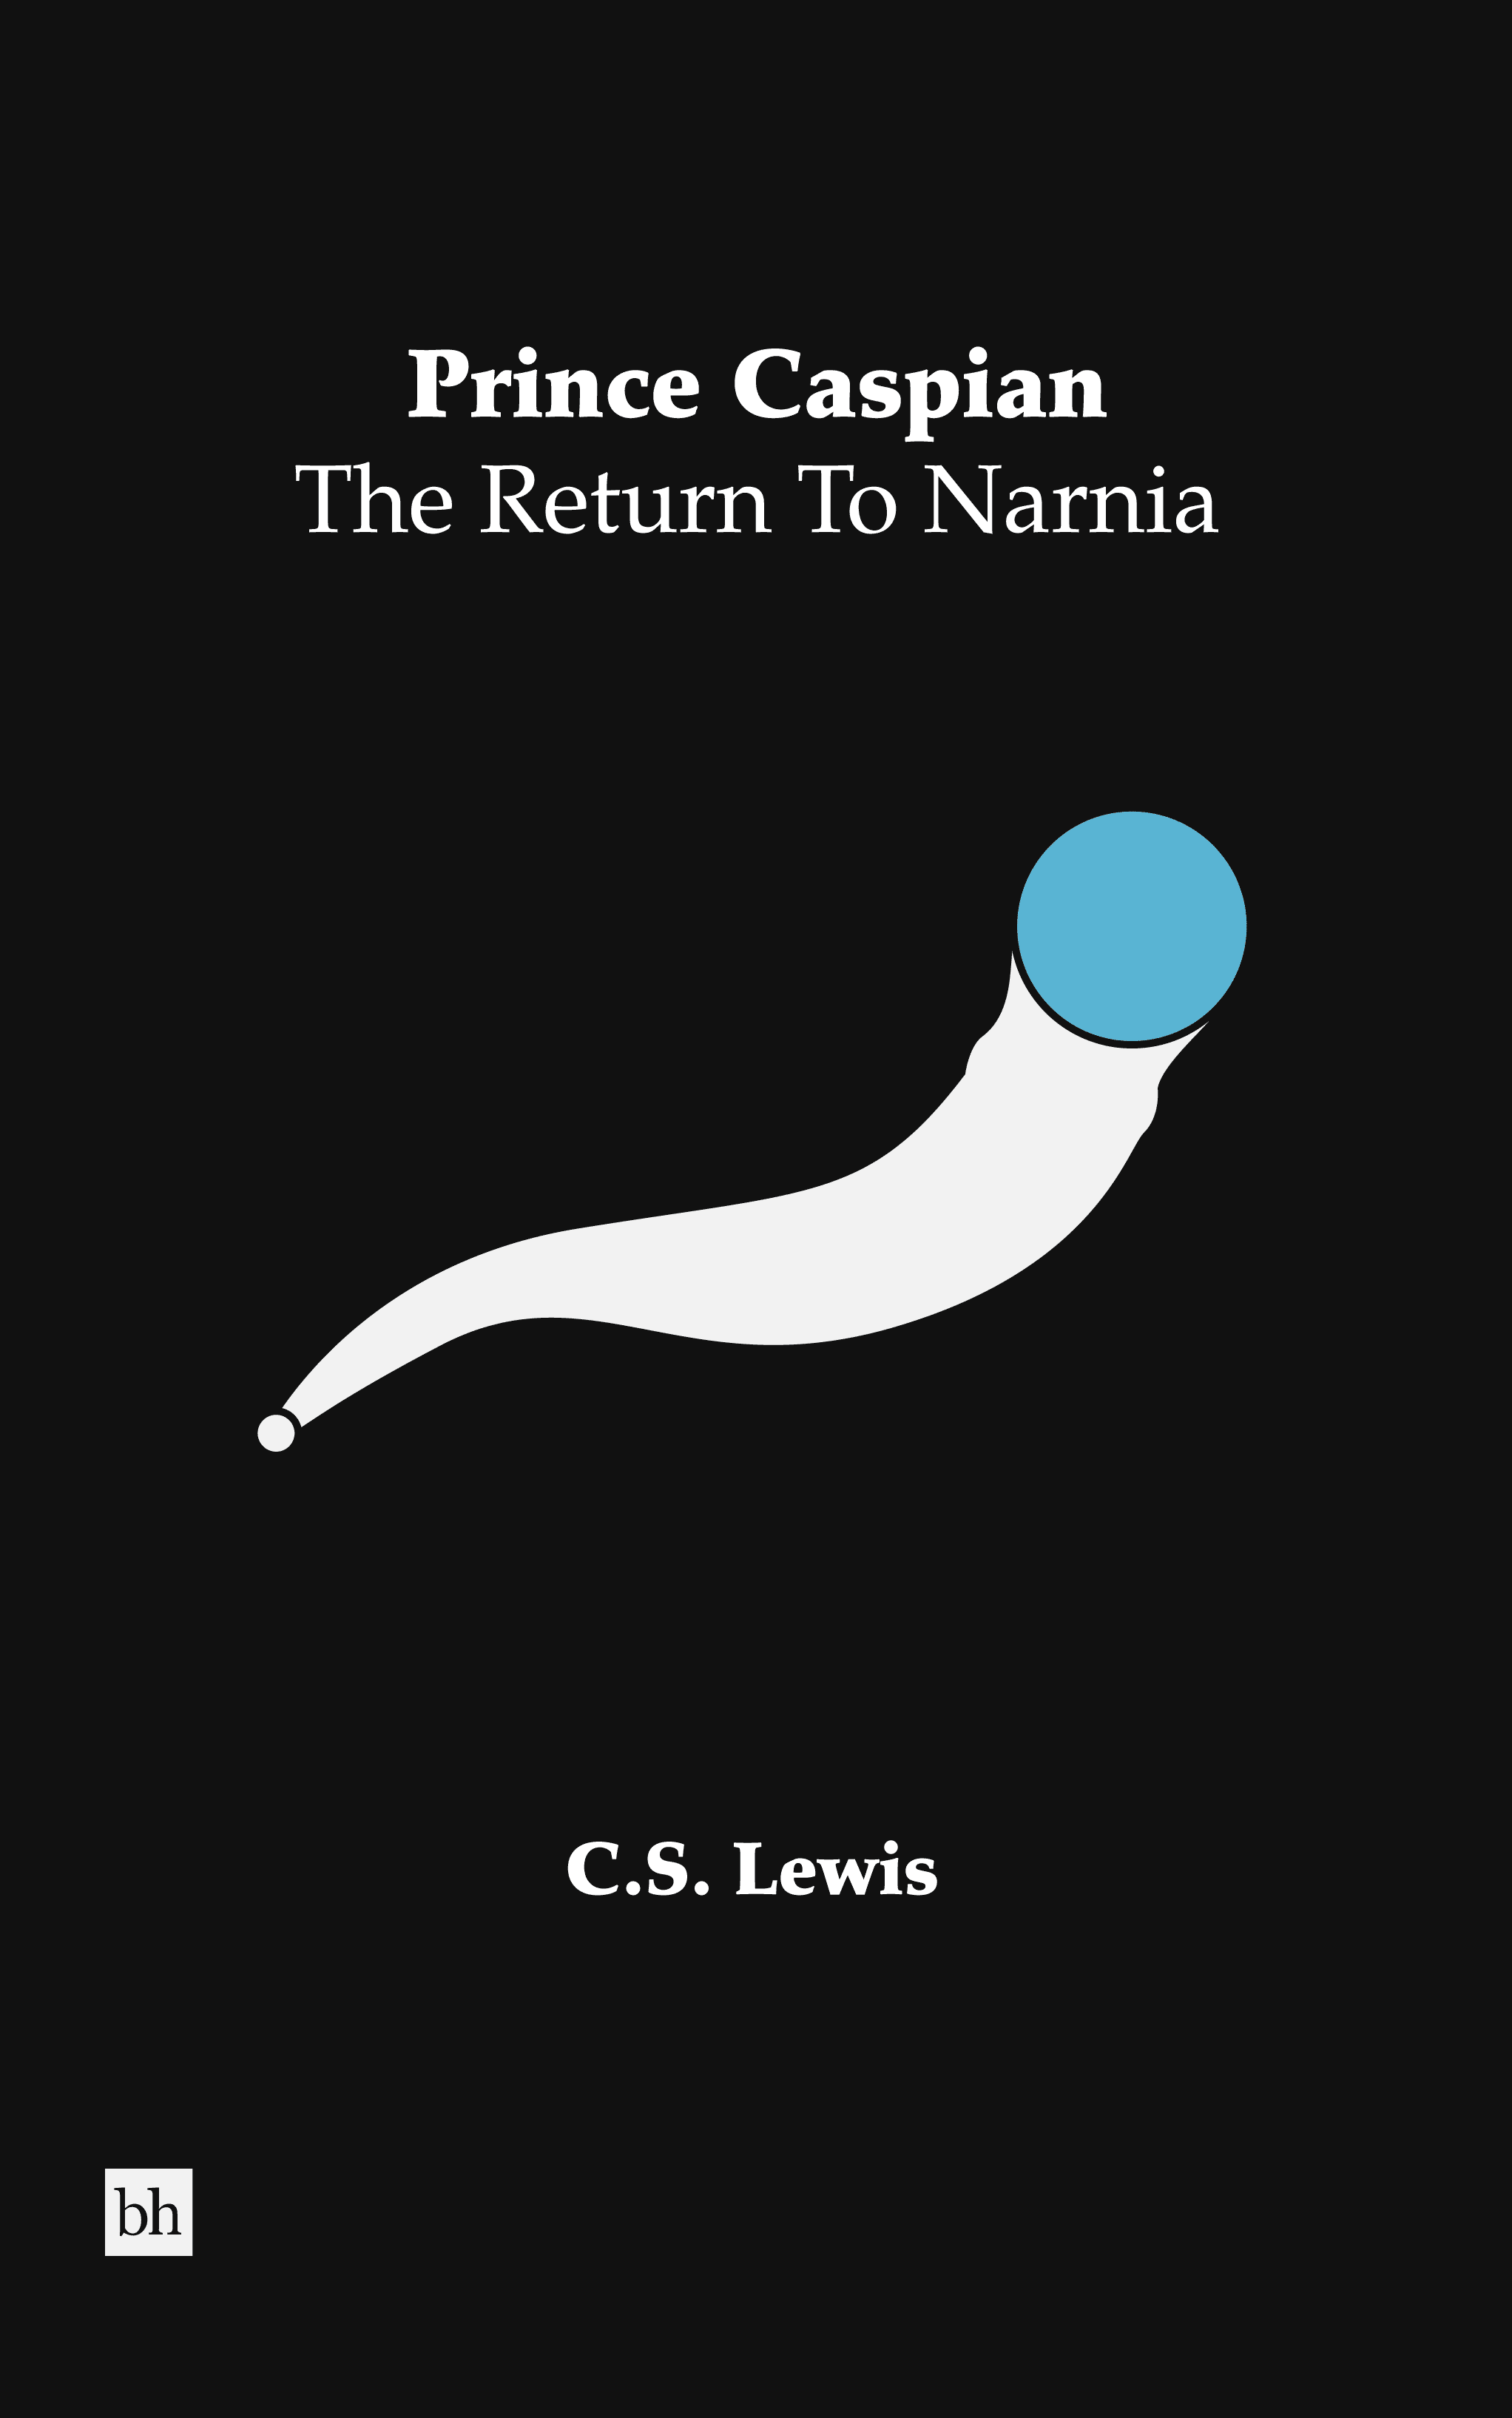 Prince Caspian: The Return To Narnia by C.S. Lewis